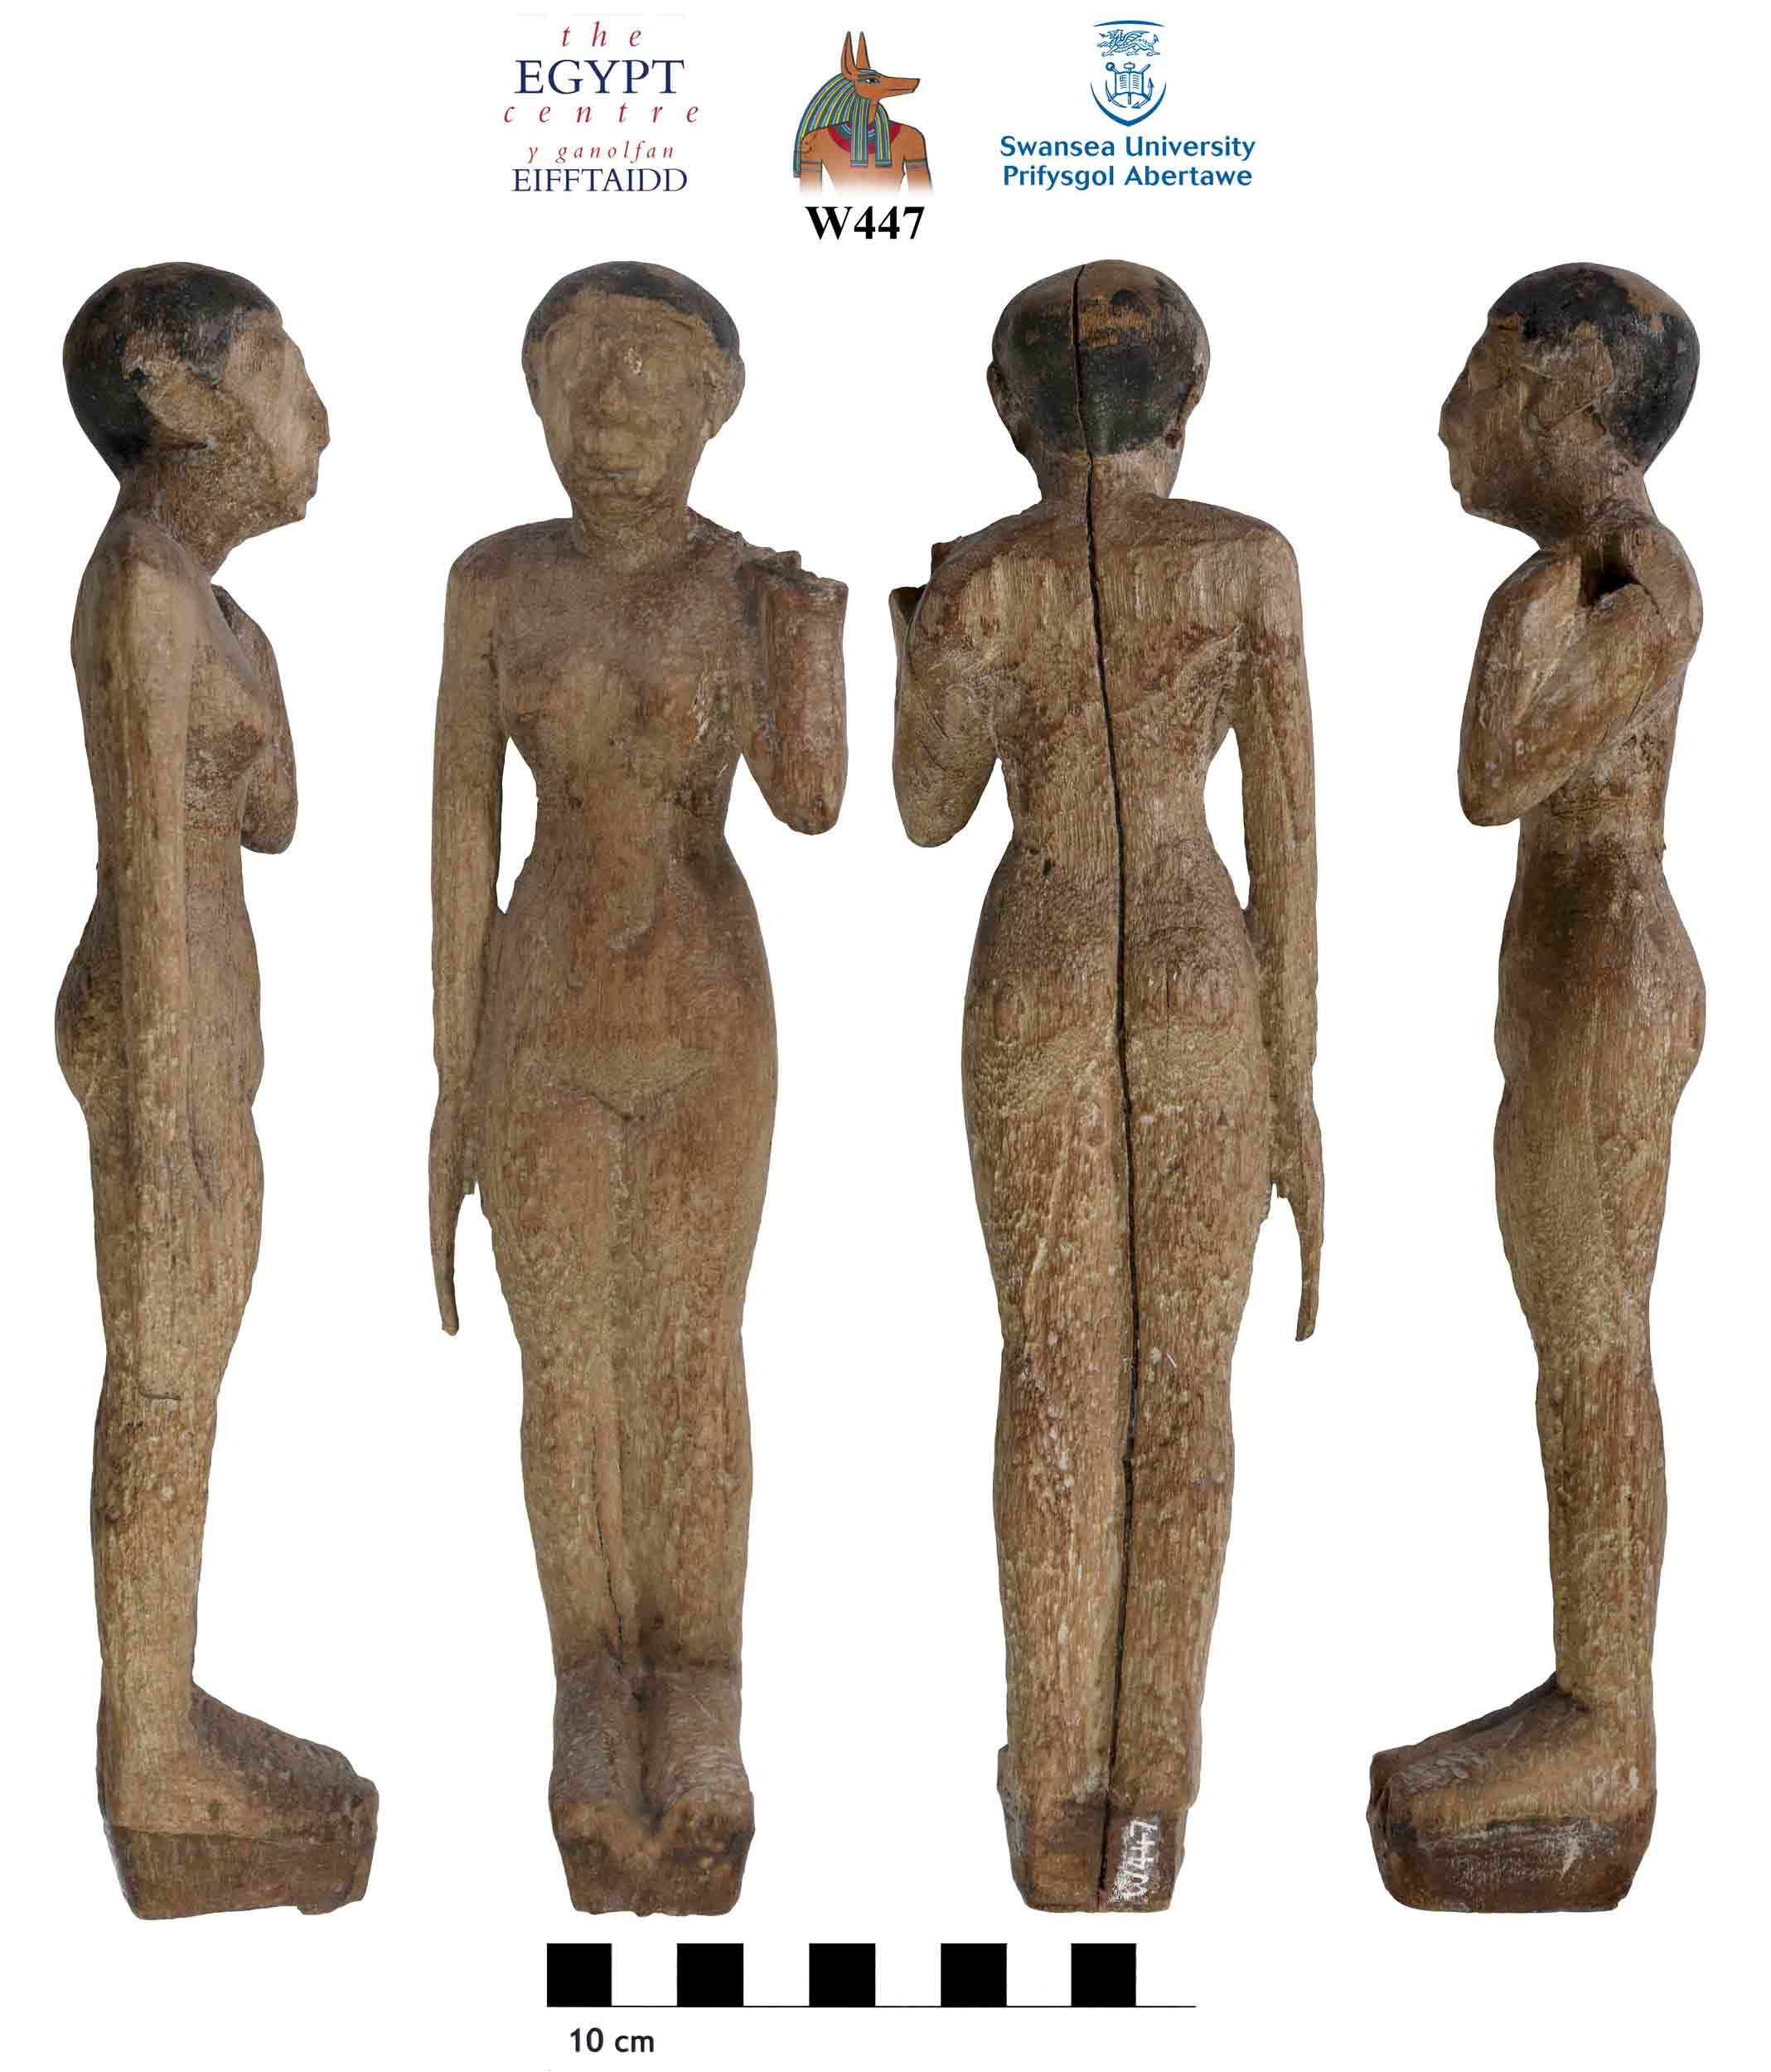 Image for: Wooden funerary figure, likely an offering bearer